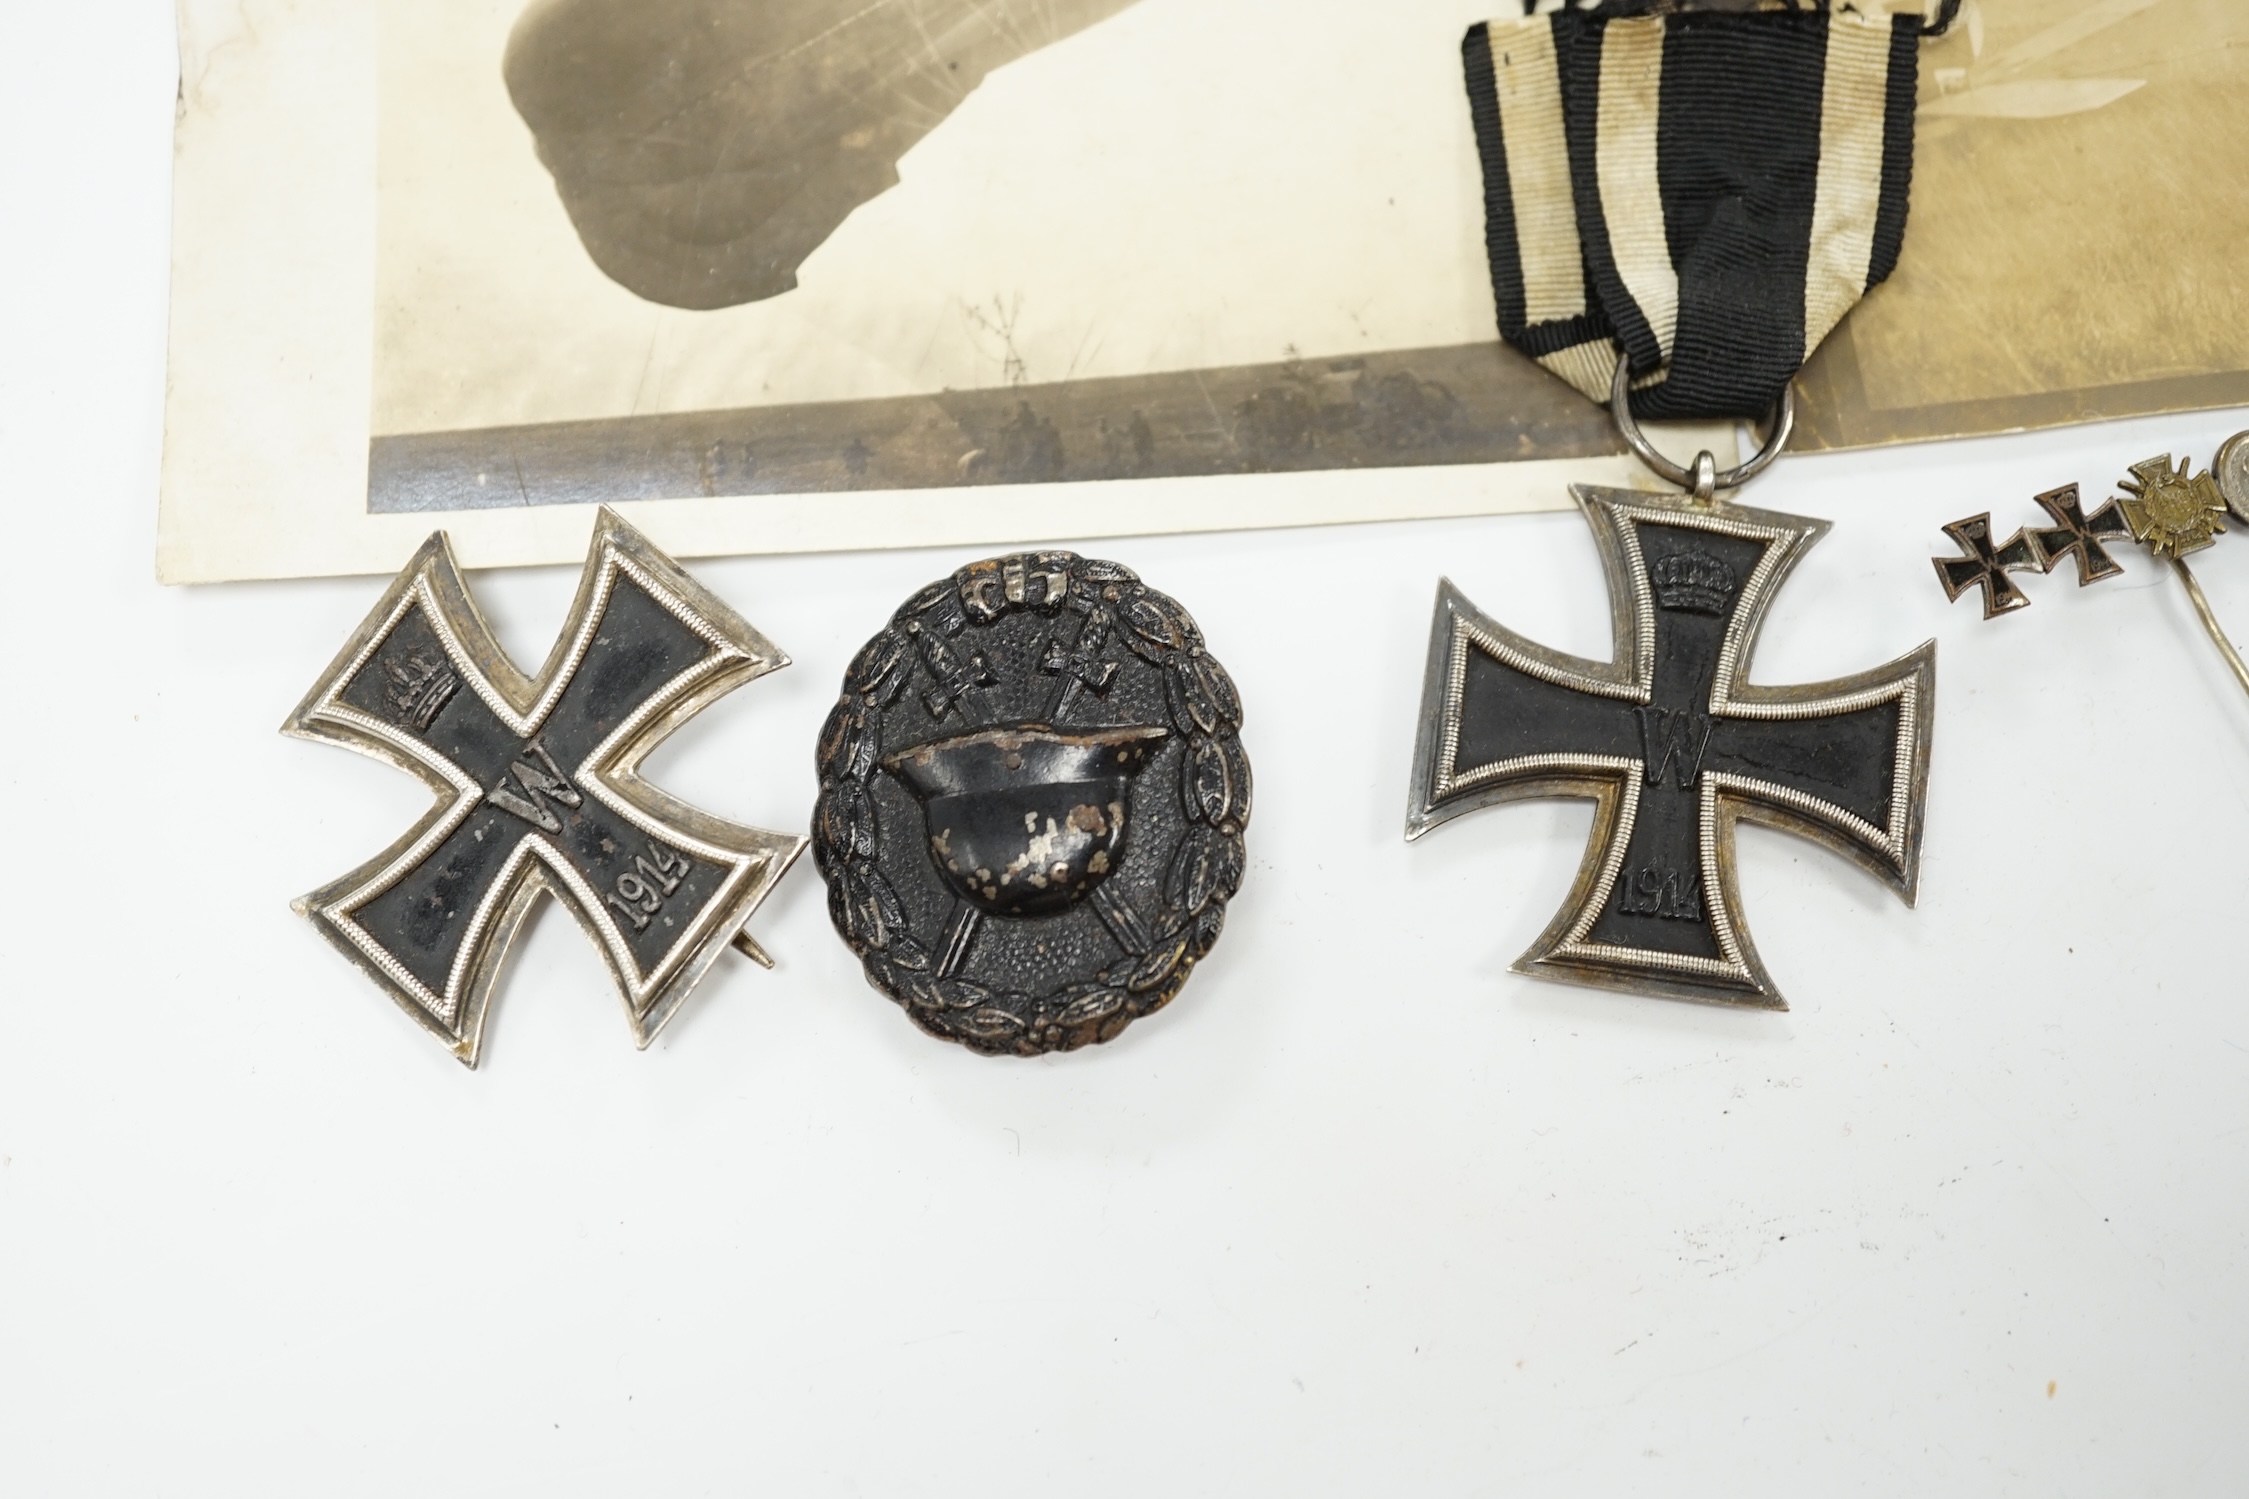 Four First World War German medals; a First Class Iron Cross, a 2nd Class Iron Cross, a 1914-1918 Honour Cross and an Austro-Hungarian Medal for Bravery, together with a wound badge and the related stick pin for the meda